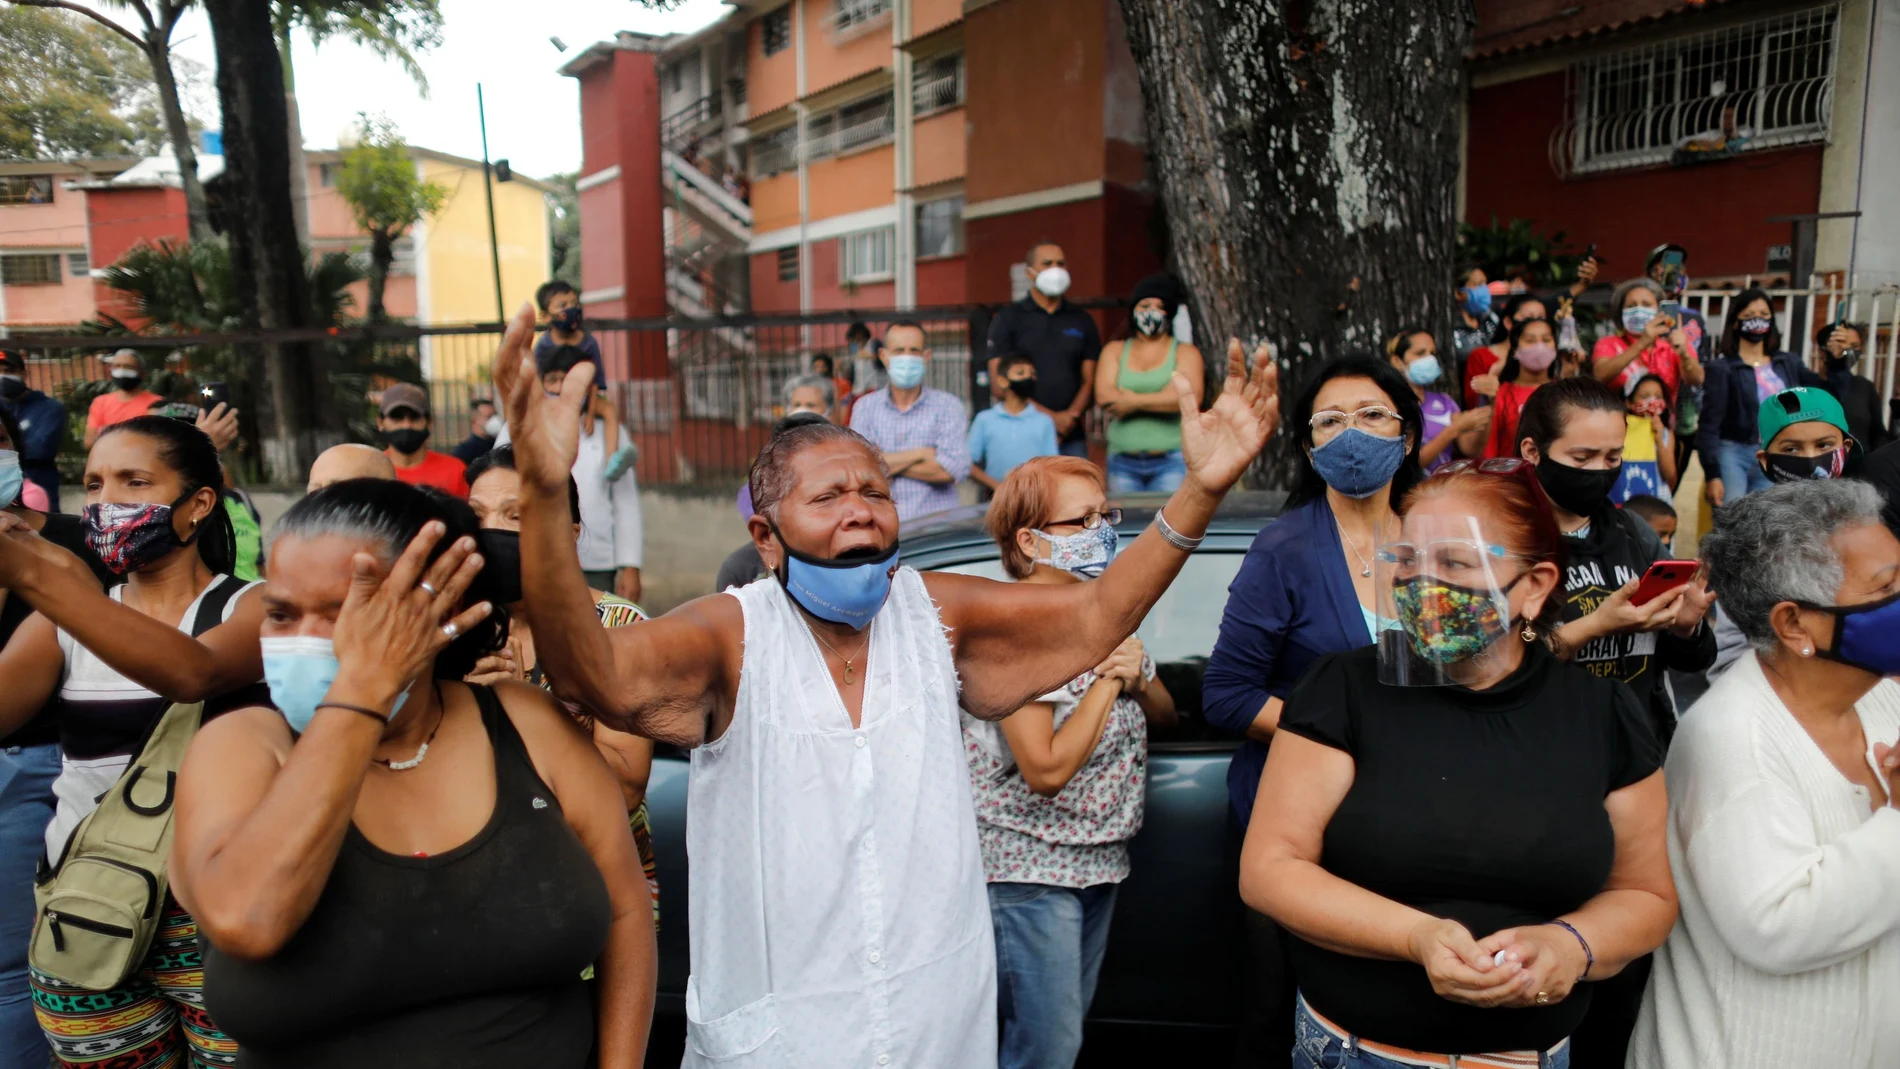 Catholic faithful react as the Popemobile carrying the statue of The Nazarene of St. Paul drives past during Holy Week celebrations in the neighbourhood Catia, in Caracas, Venezuela March 31, 2021. REUTERS/Leonardo Fernandez Viloria NO RESALES. NO ARCHIVES